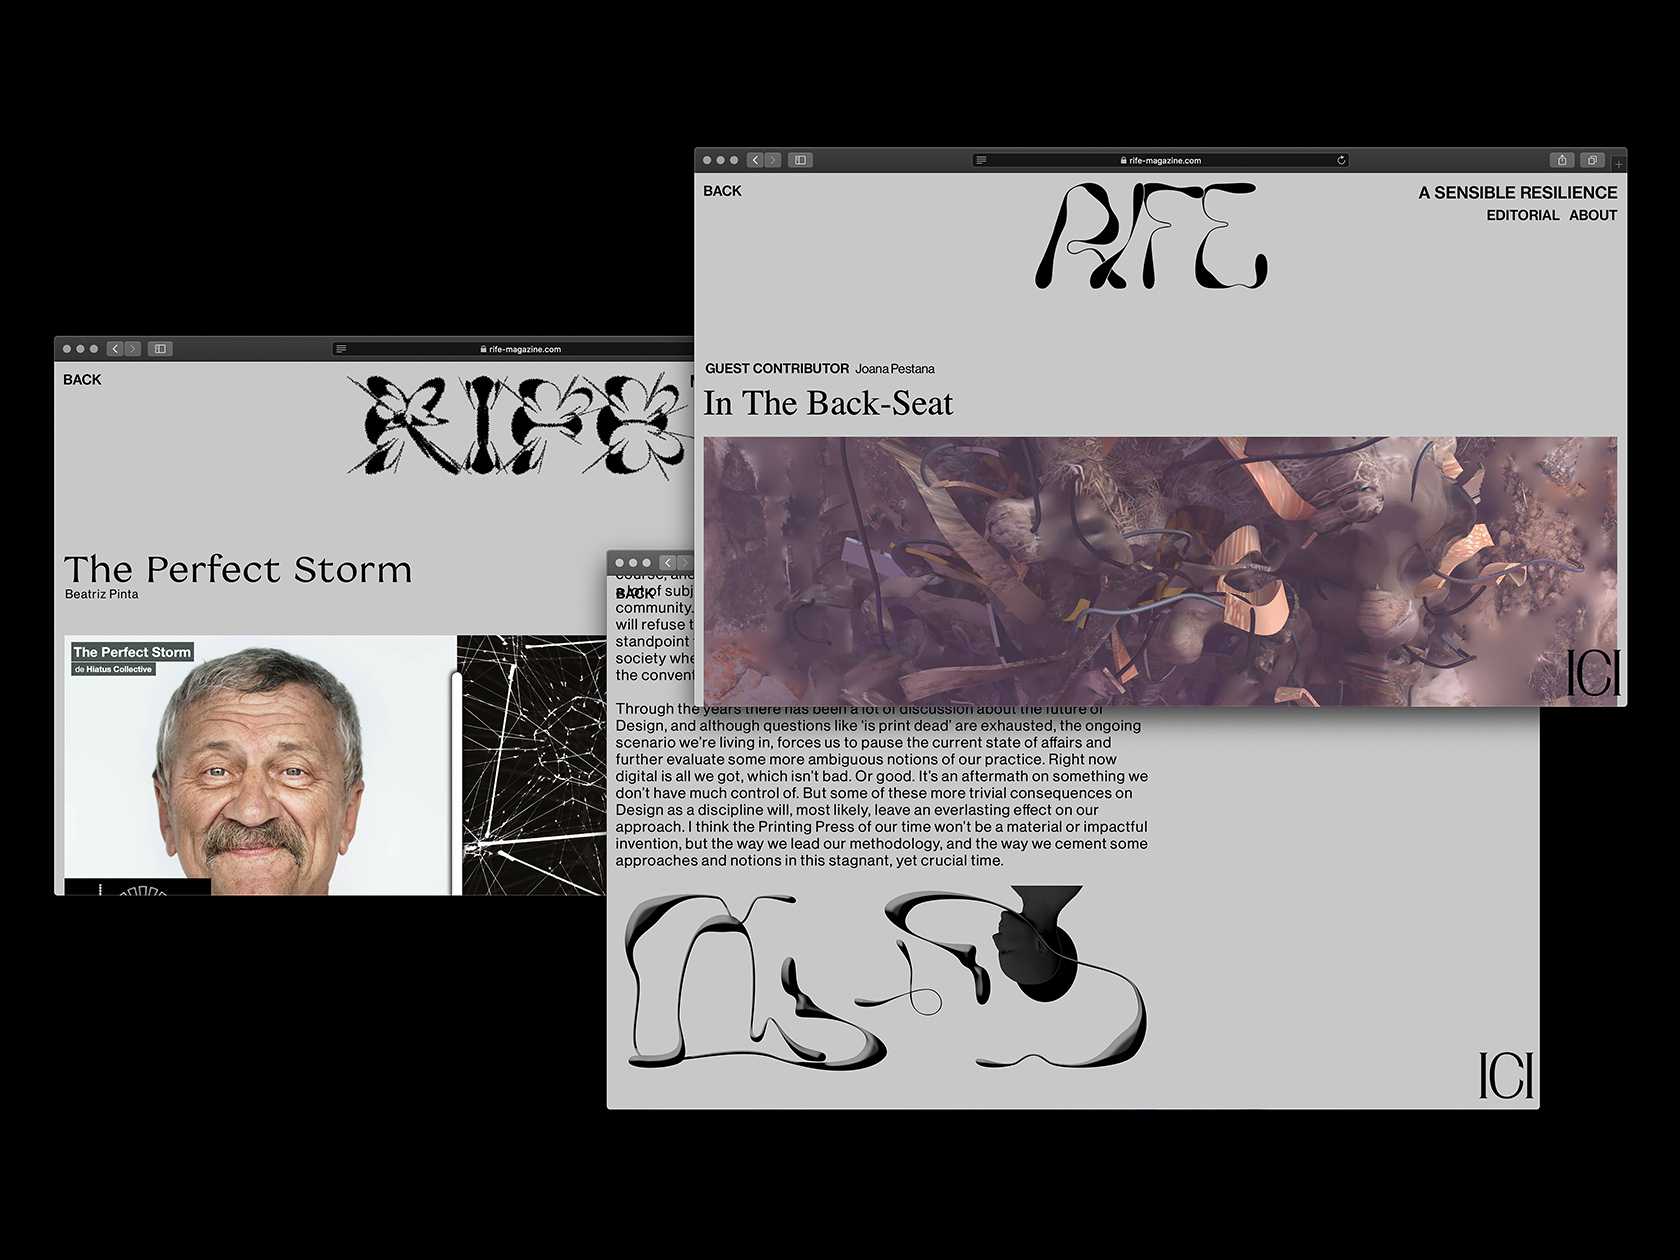 The magazine “Rife” by Hiatus Collective taps the full potential of digital publishing